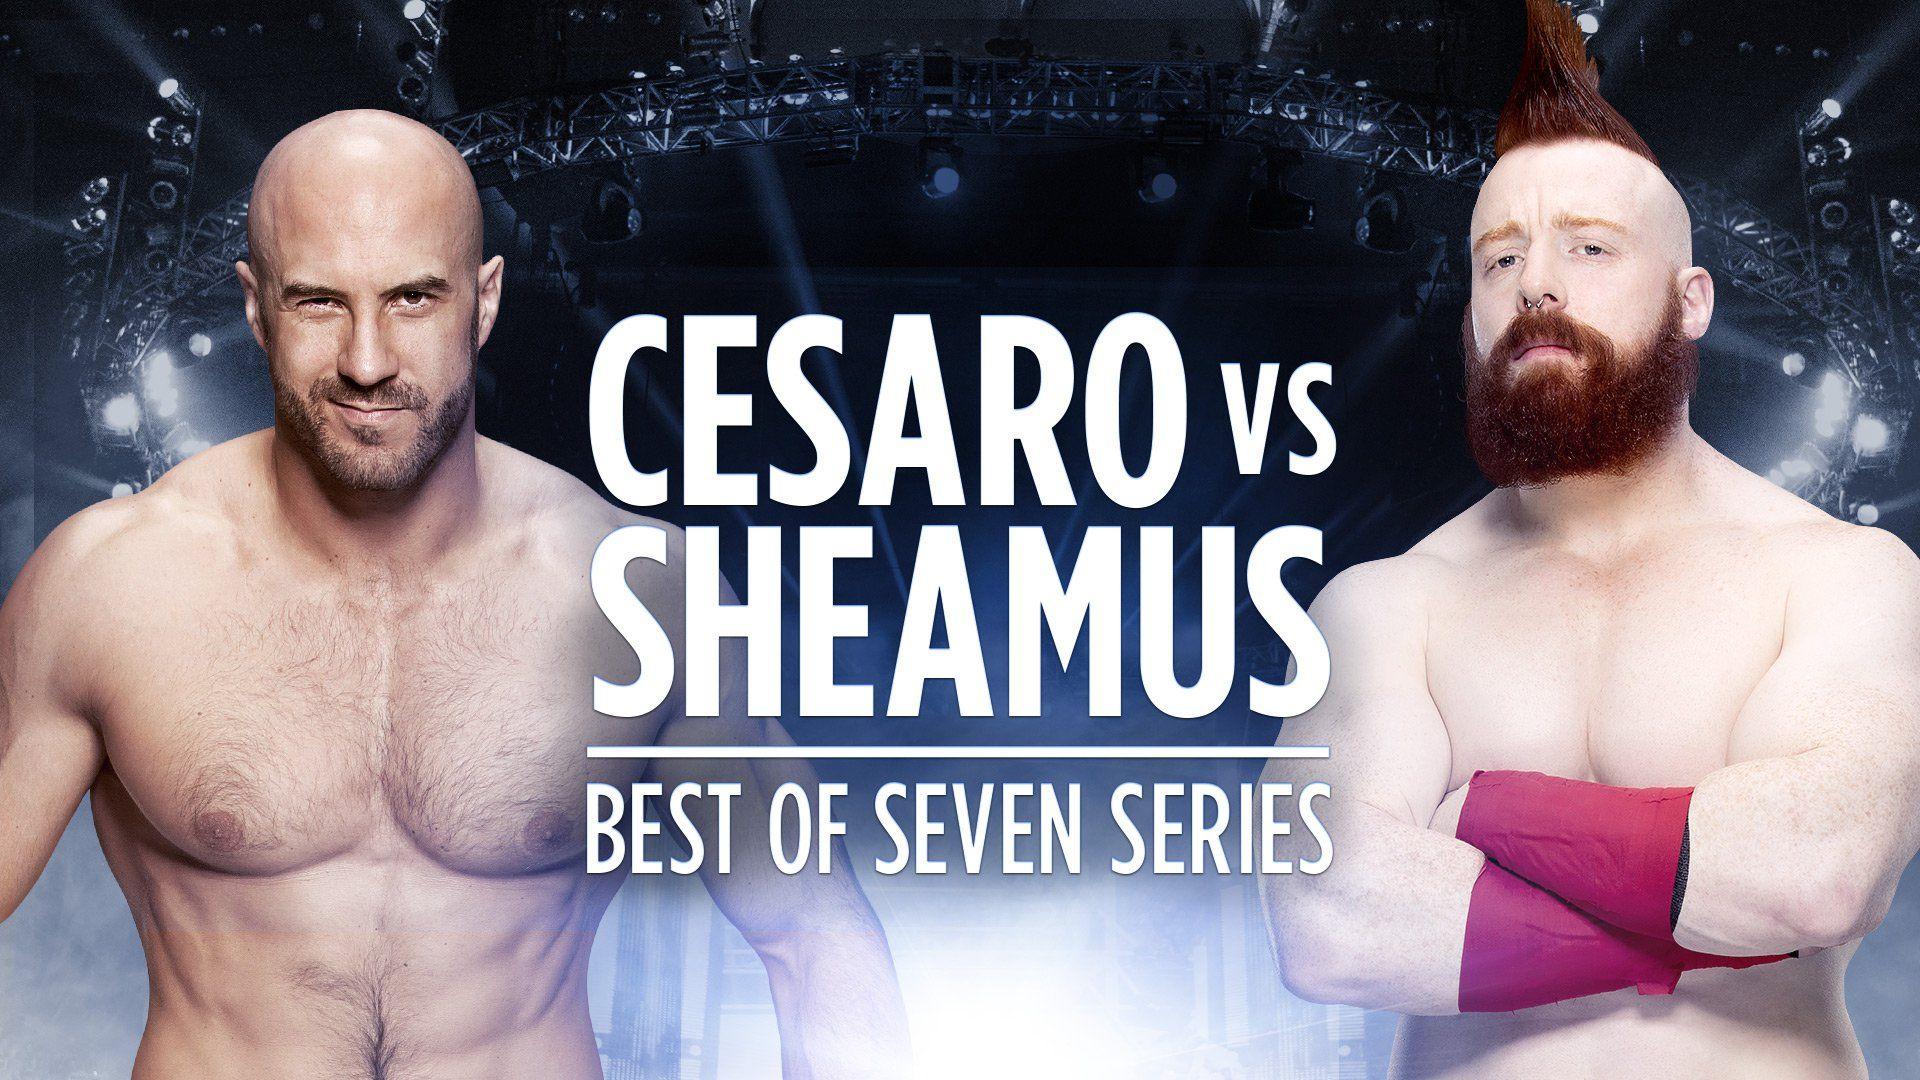 Follow Cesaro and Sheamus' Best of Seven Series with this WWE.com